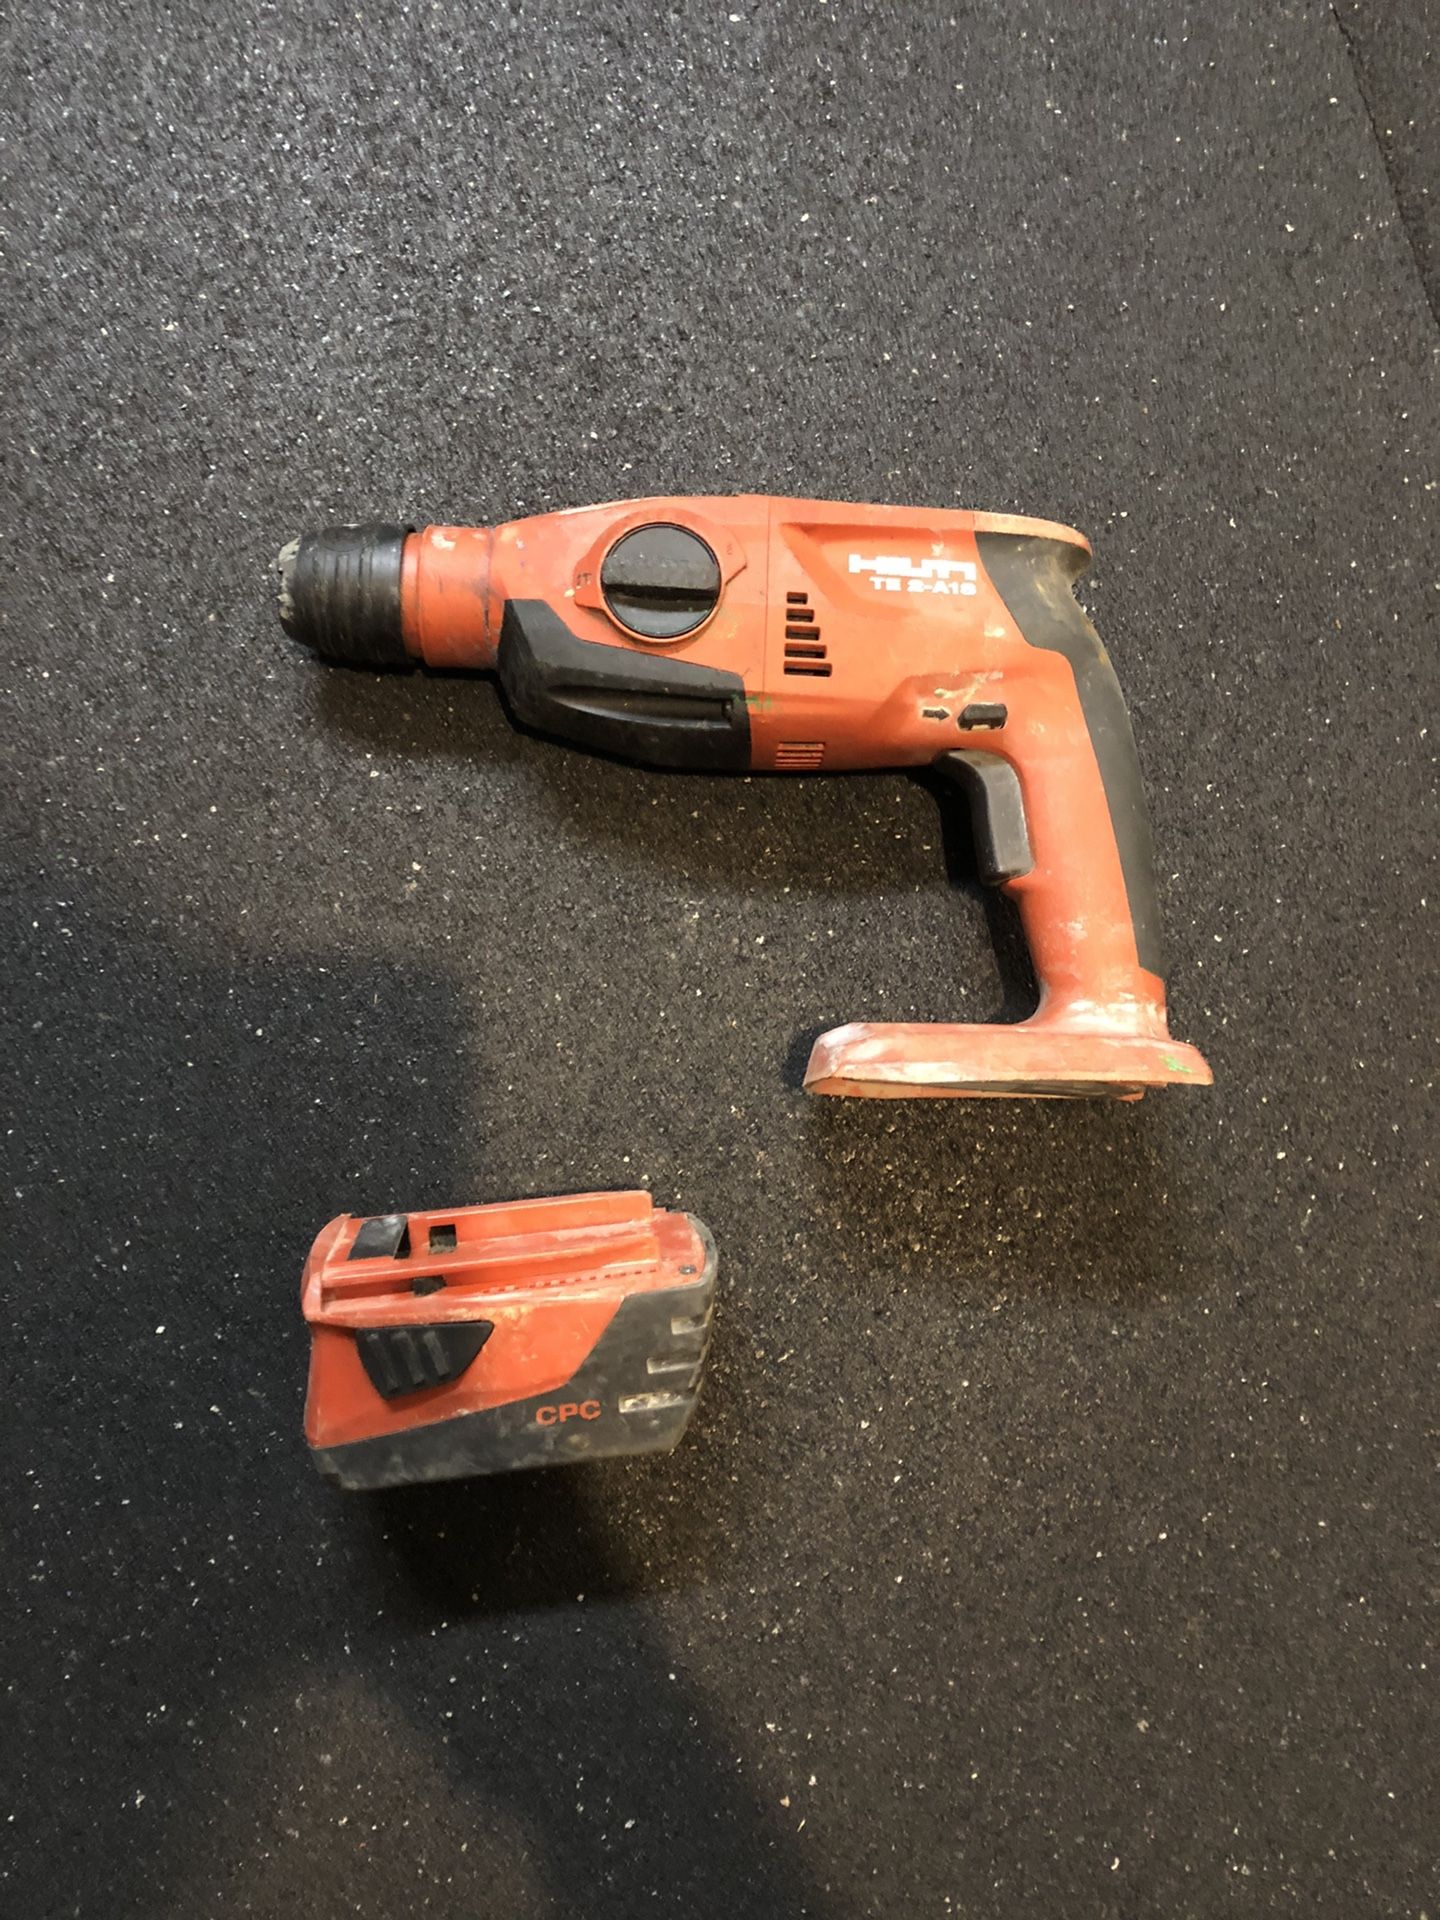 Hilti roto hammer and battery (No charger)